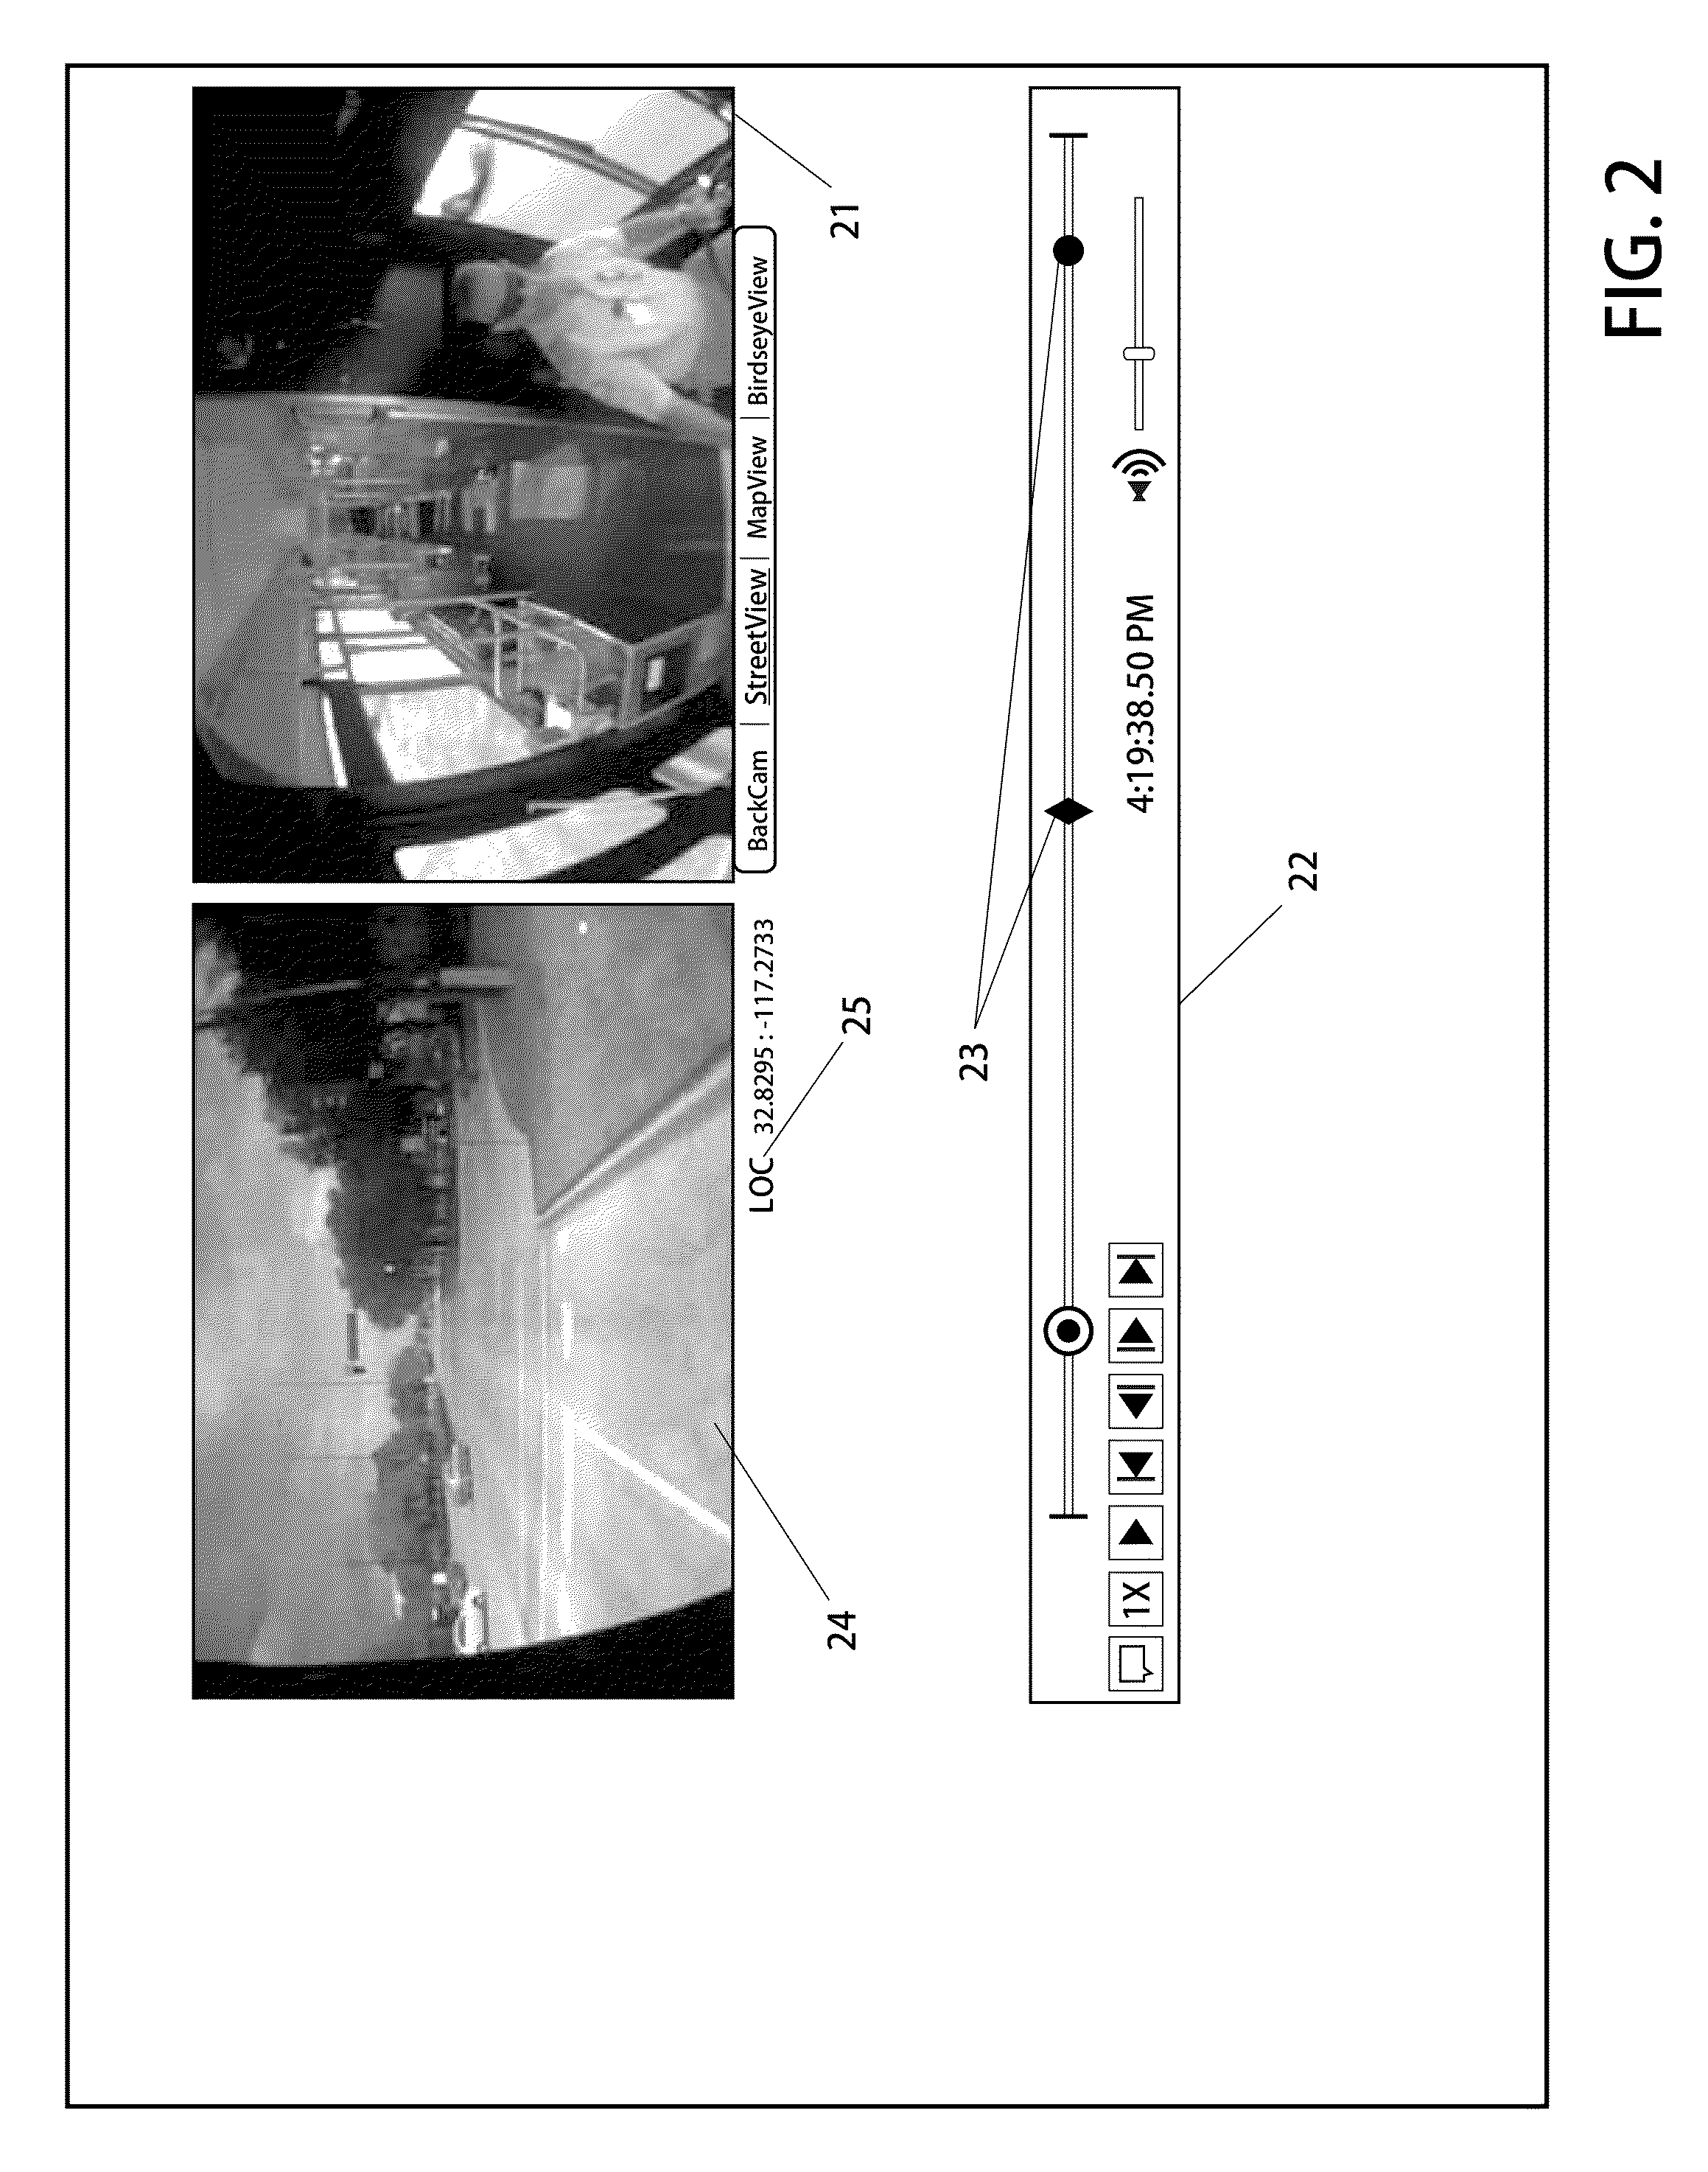 Vehicle Event Playback Apparatus and Methods